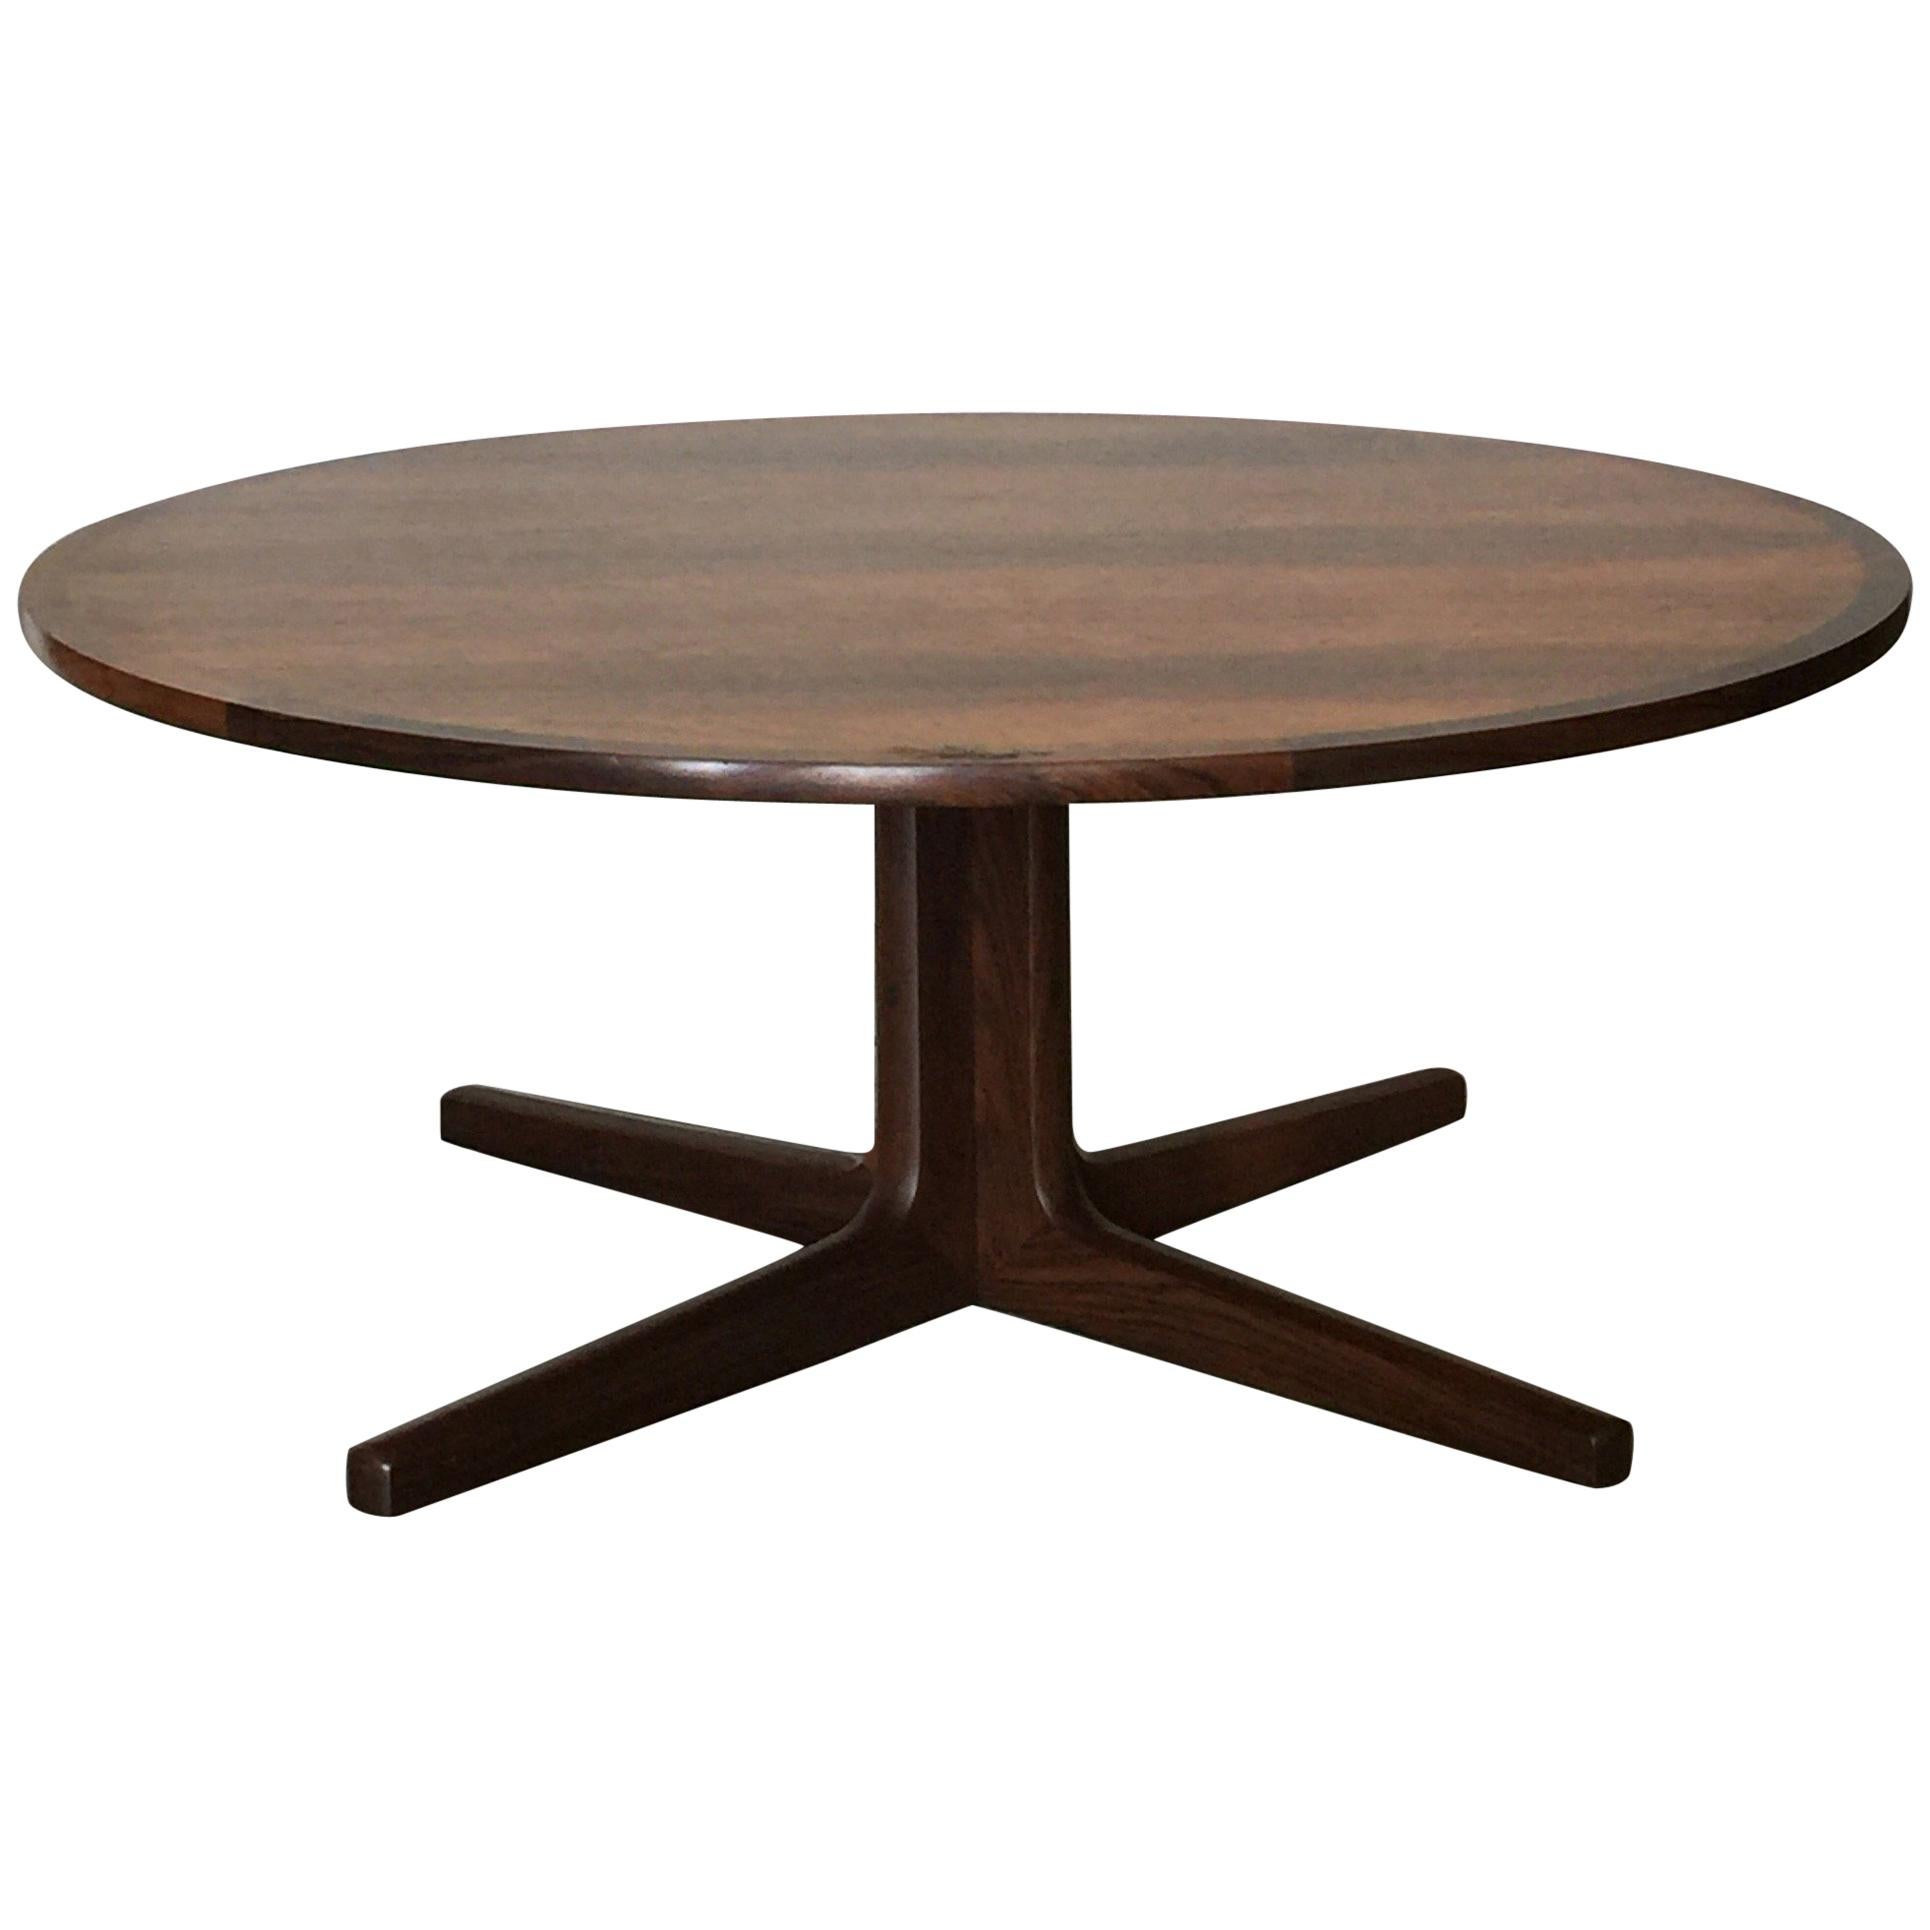 Impeccable Hans C. Andersen Danish Rosewood Round Coffee Table For Sale